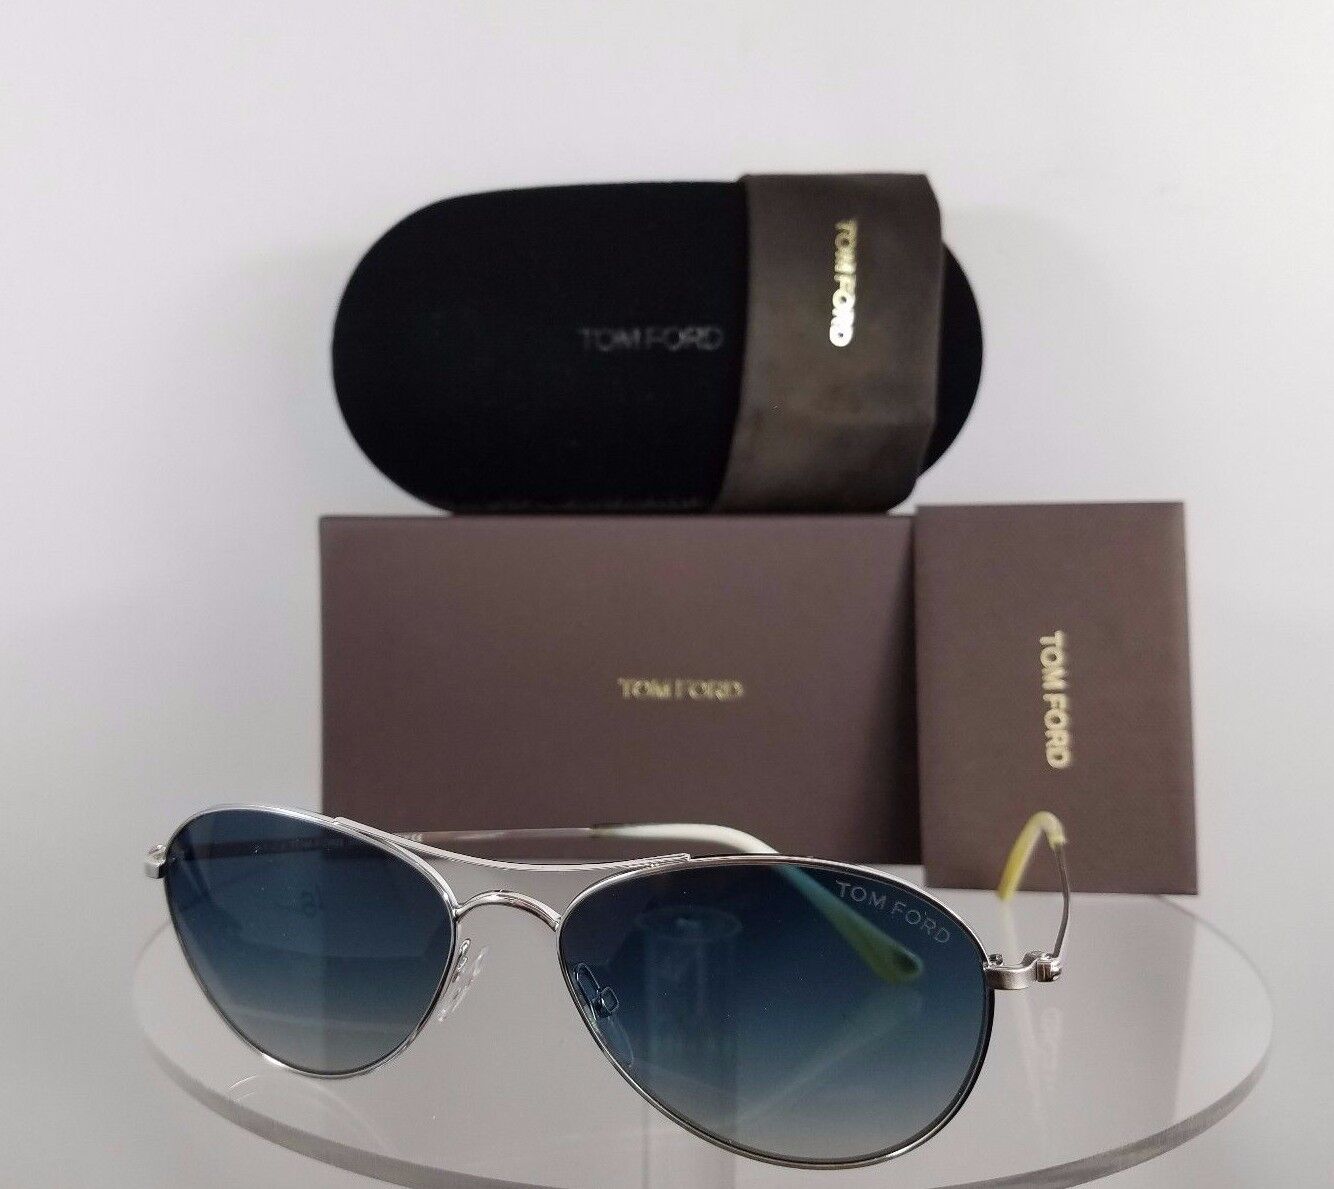 Brand New Authentic Tom Ford Sunglasses TF 495 Oliver 18W 56mm Frame TF495